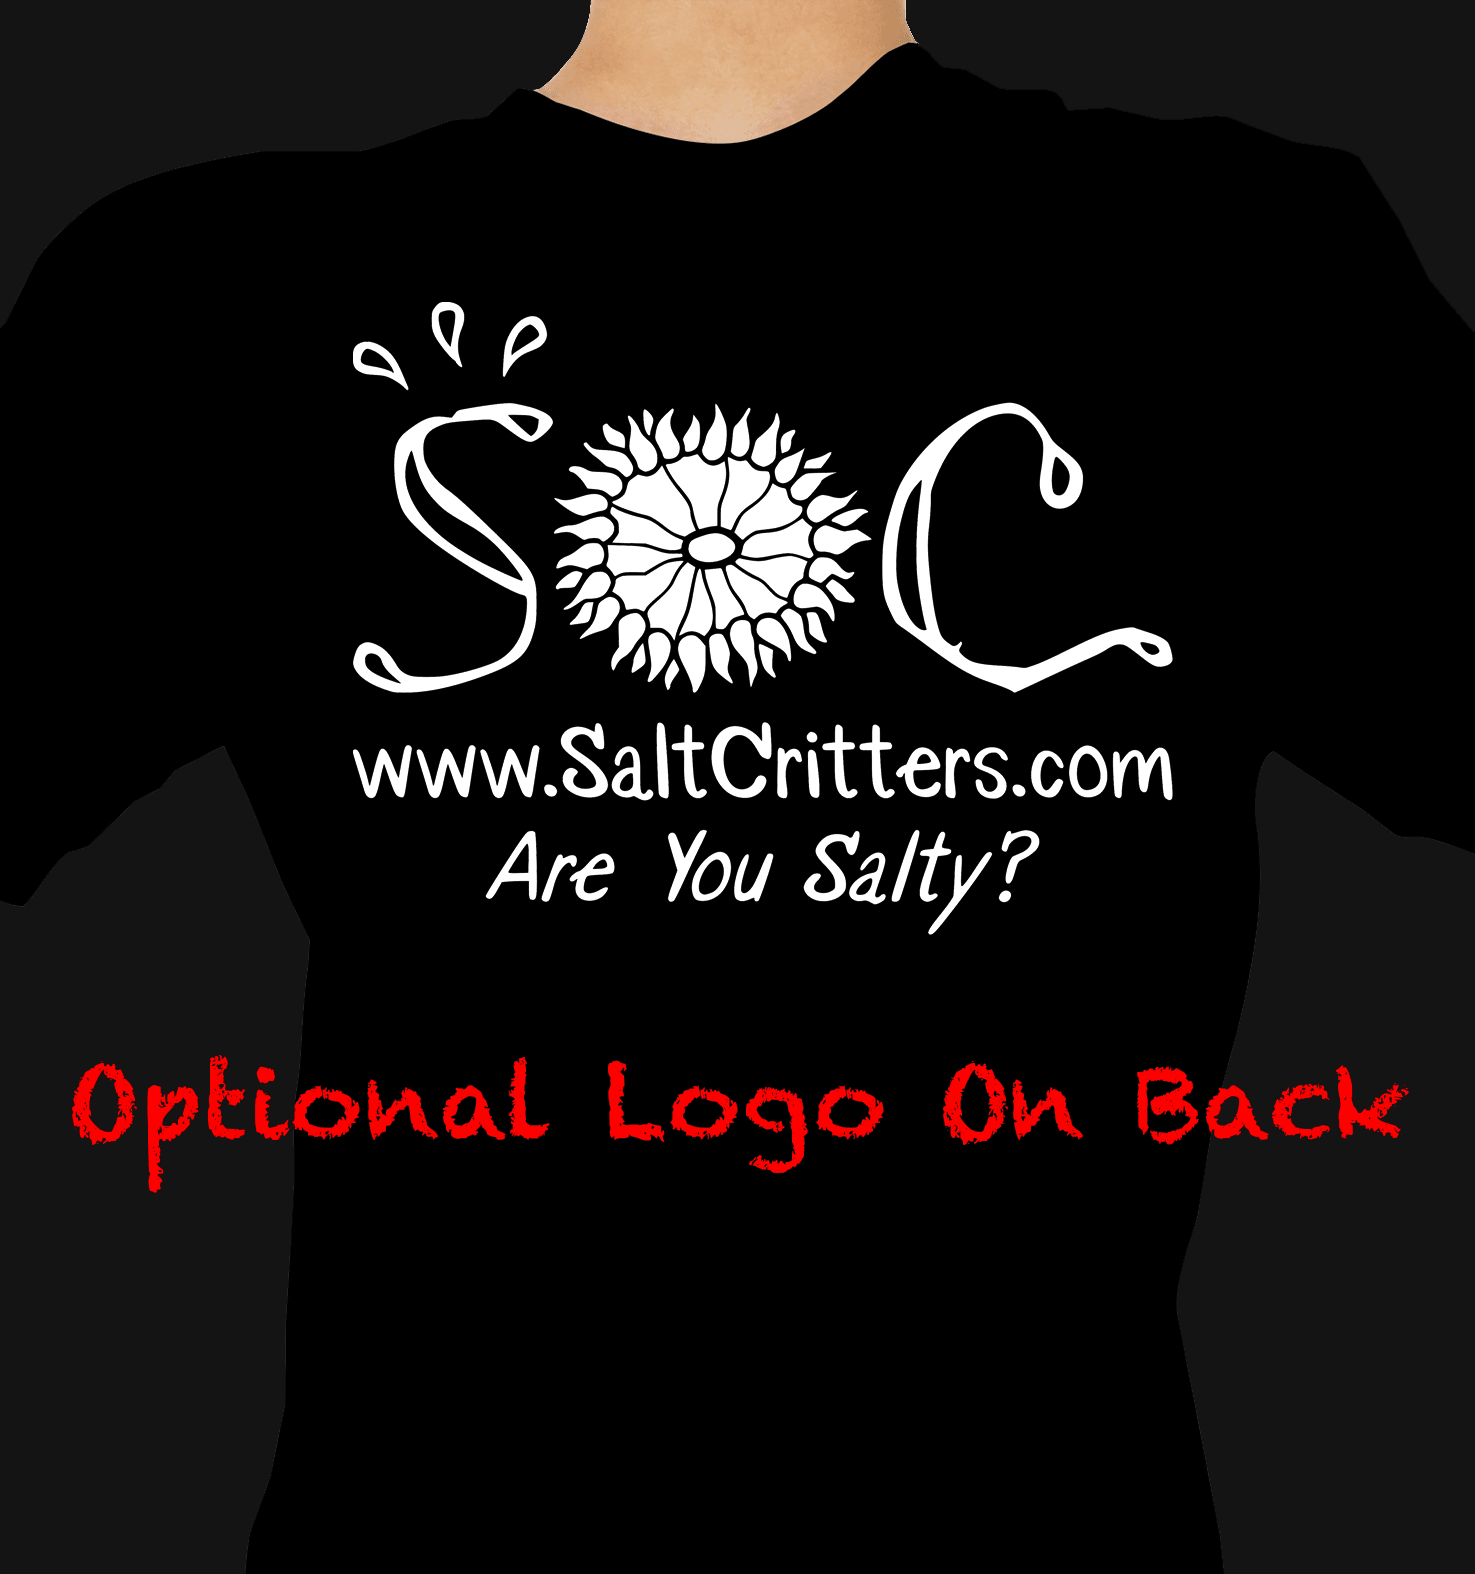 Sorry I Can't My Corals Need Me T-Shirt Grey - SaltCritters